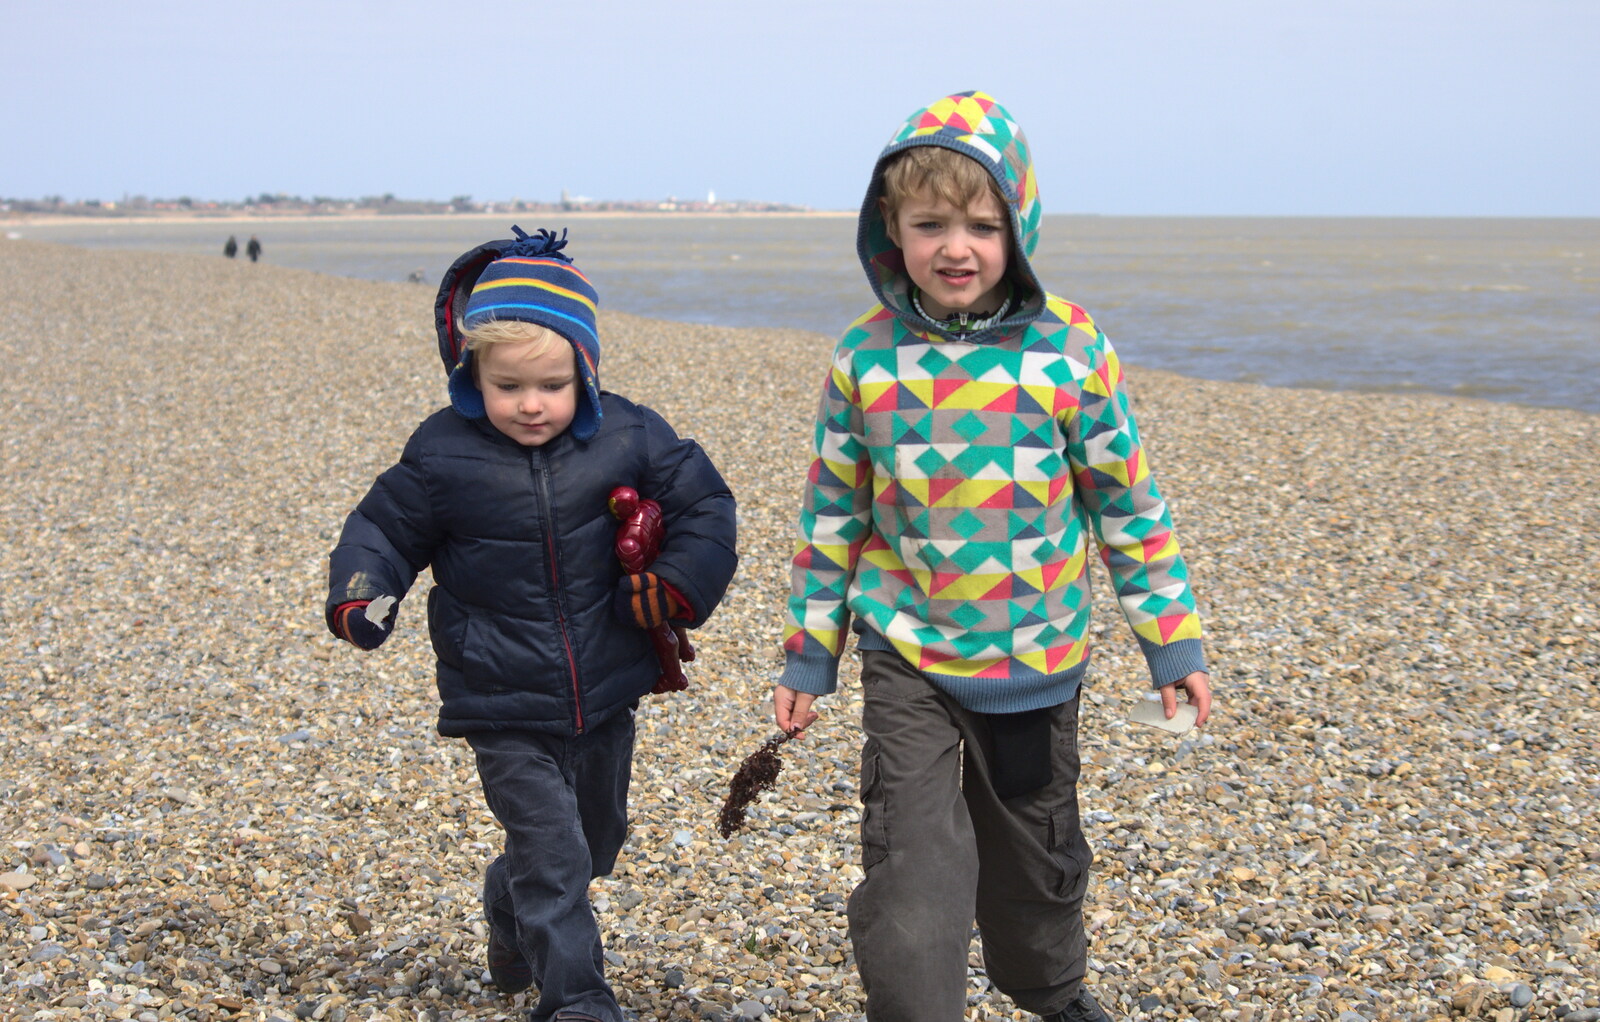 Harry and Fred run along the beach from A Day on the Beach, Dunwich, Suffolk - 6th April 2015